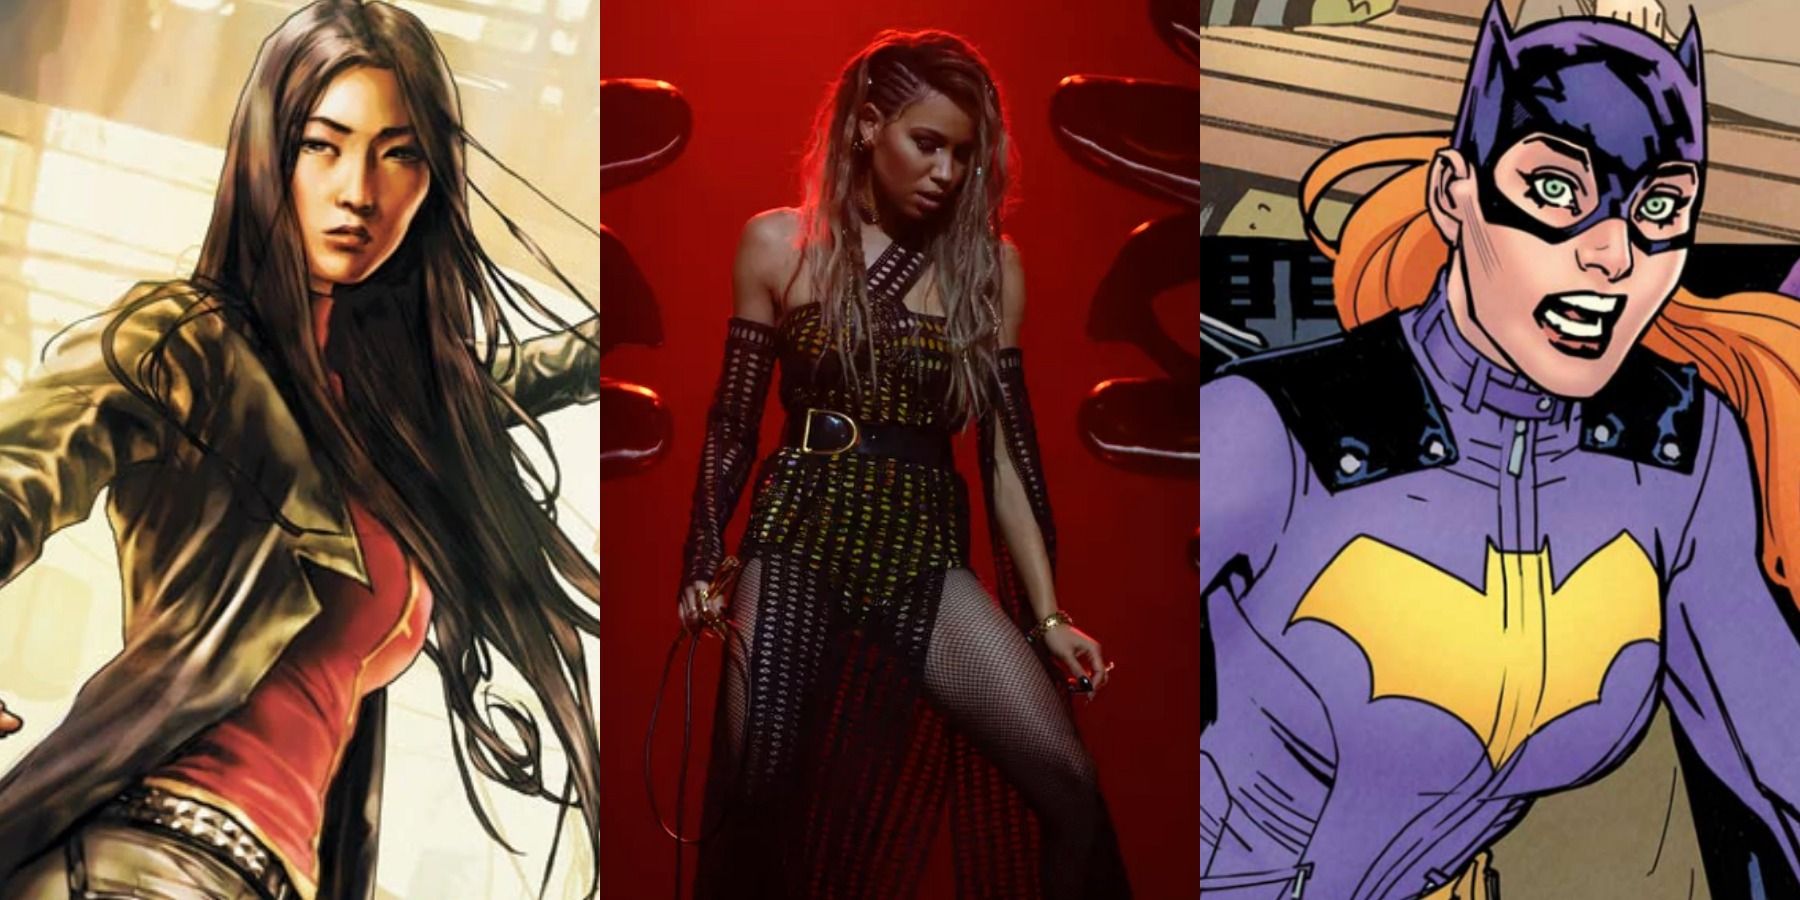 A split image depicts Lady Shiva in DC Comics, Black Canary in the DCEU, and Batgirl in DC Comics